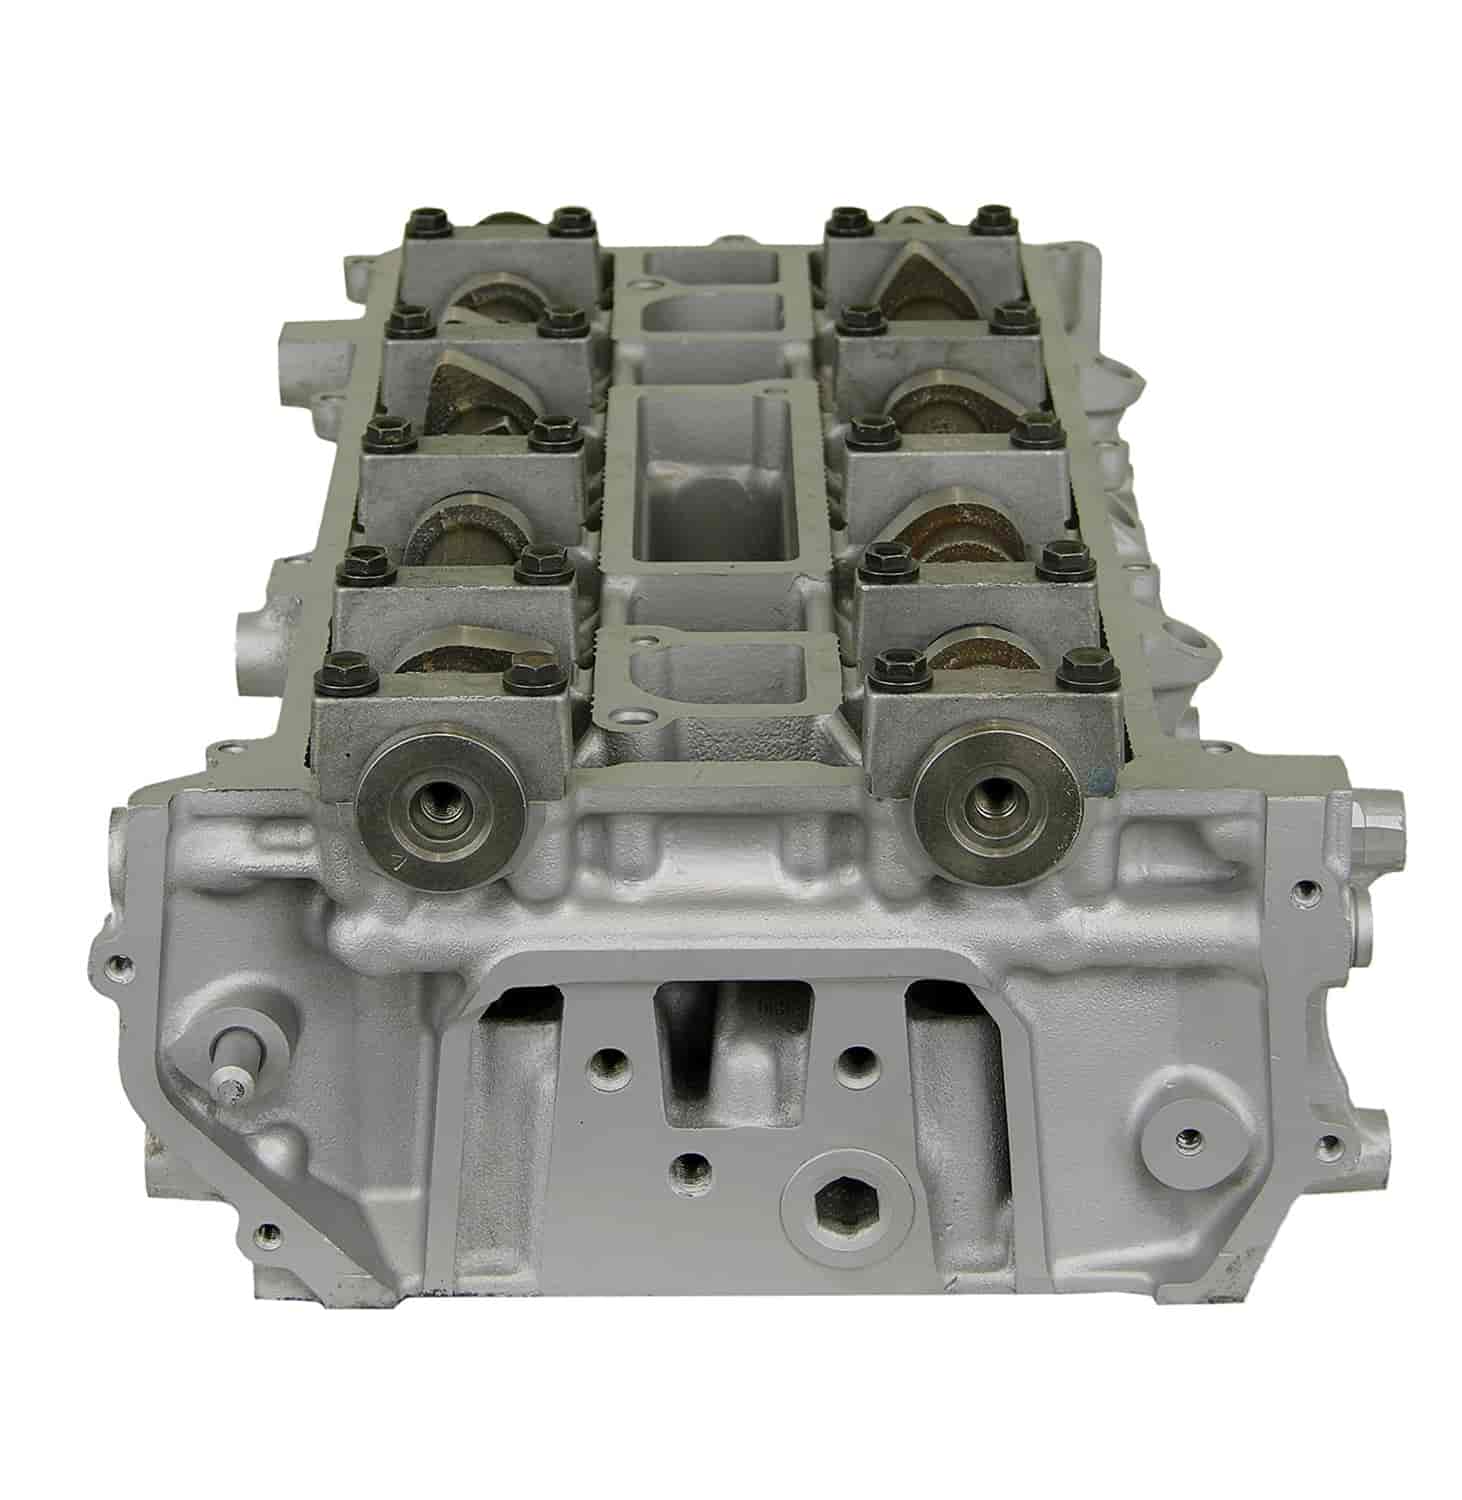 Remanufactured Cylinder Head for 2003-2011 Ford/Mazda with